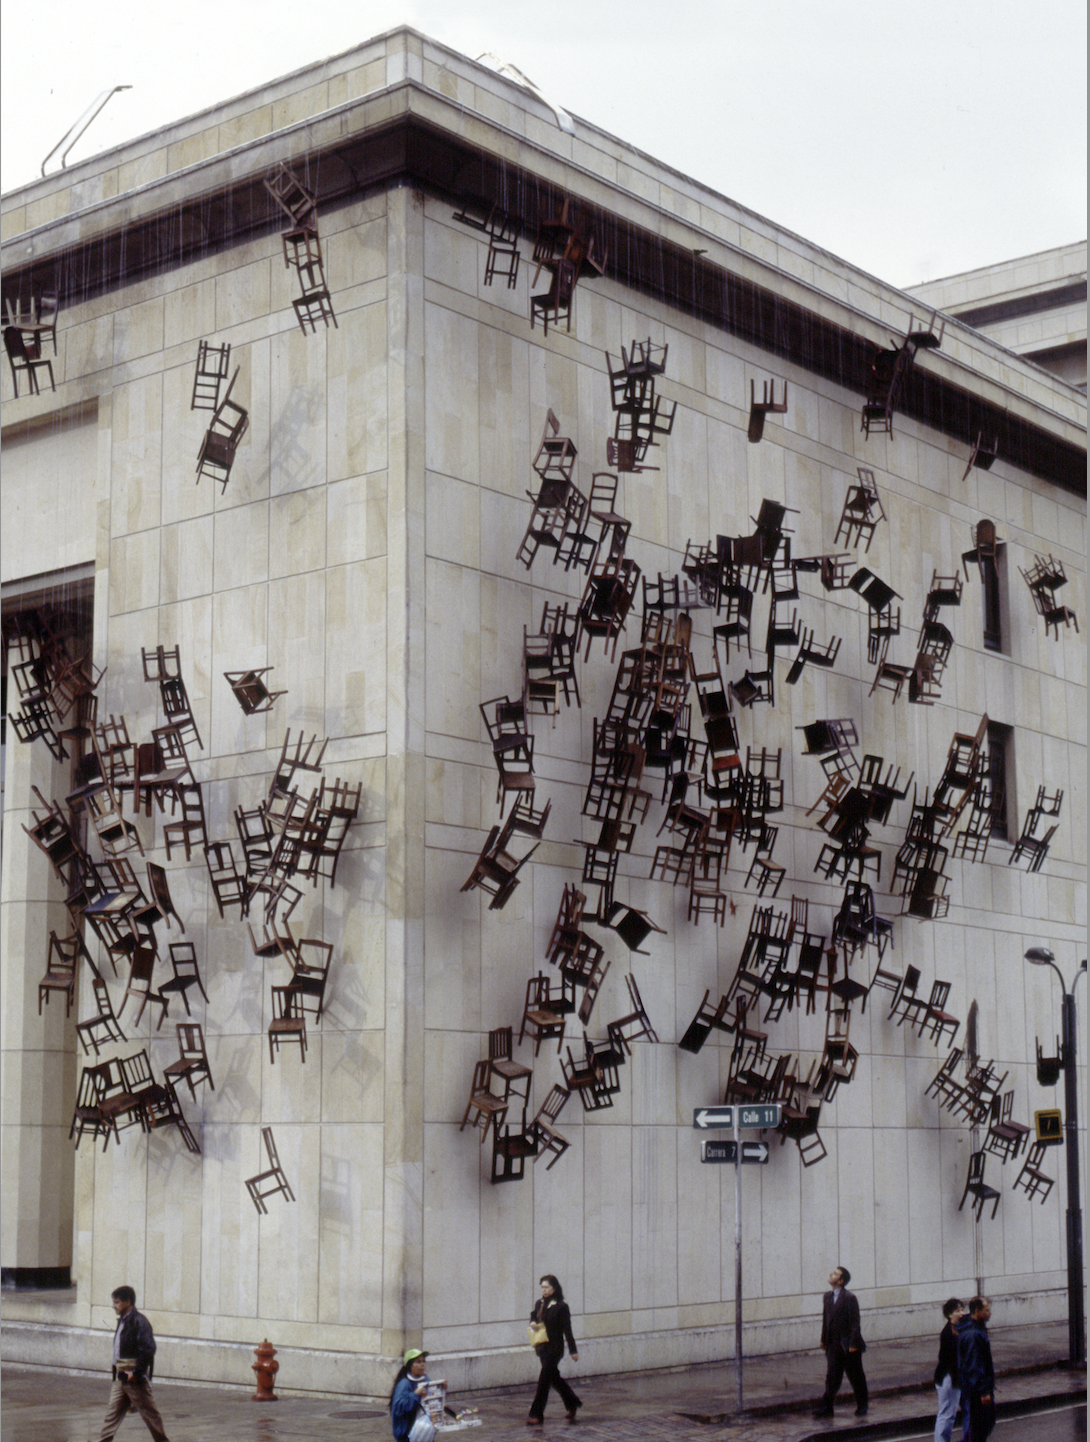 Color photograph of the exterior of a light grey municipal building, seen from slightly above. Thirty to forty dark wooden chairs hang are being lowered from the eaves of the building, making it look as though the building is being swarmed by large bugs or animals. A dark, wet sidewalk runs left to right across the bottom of the photo where half a dozen people are captured frozen, walking purposefully.